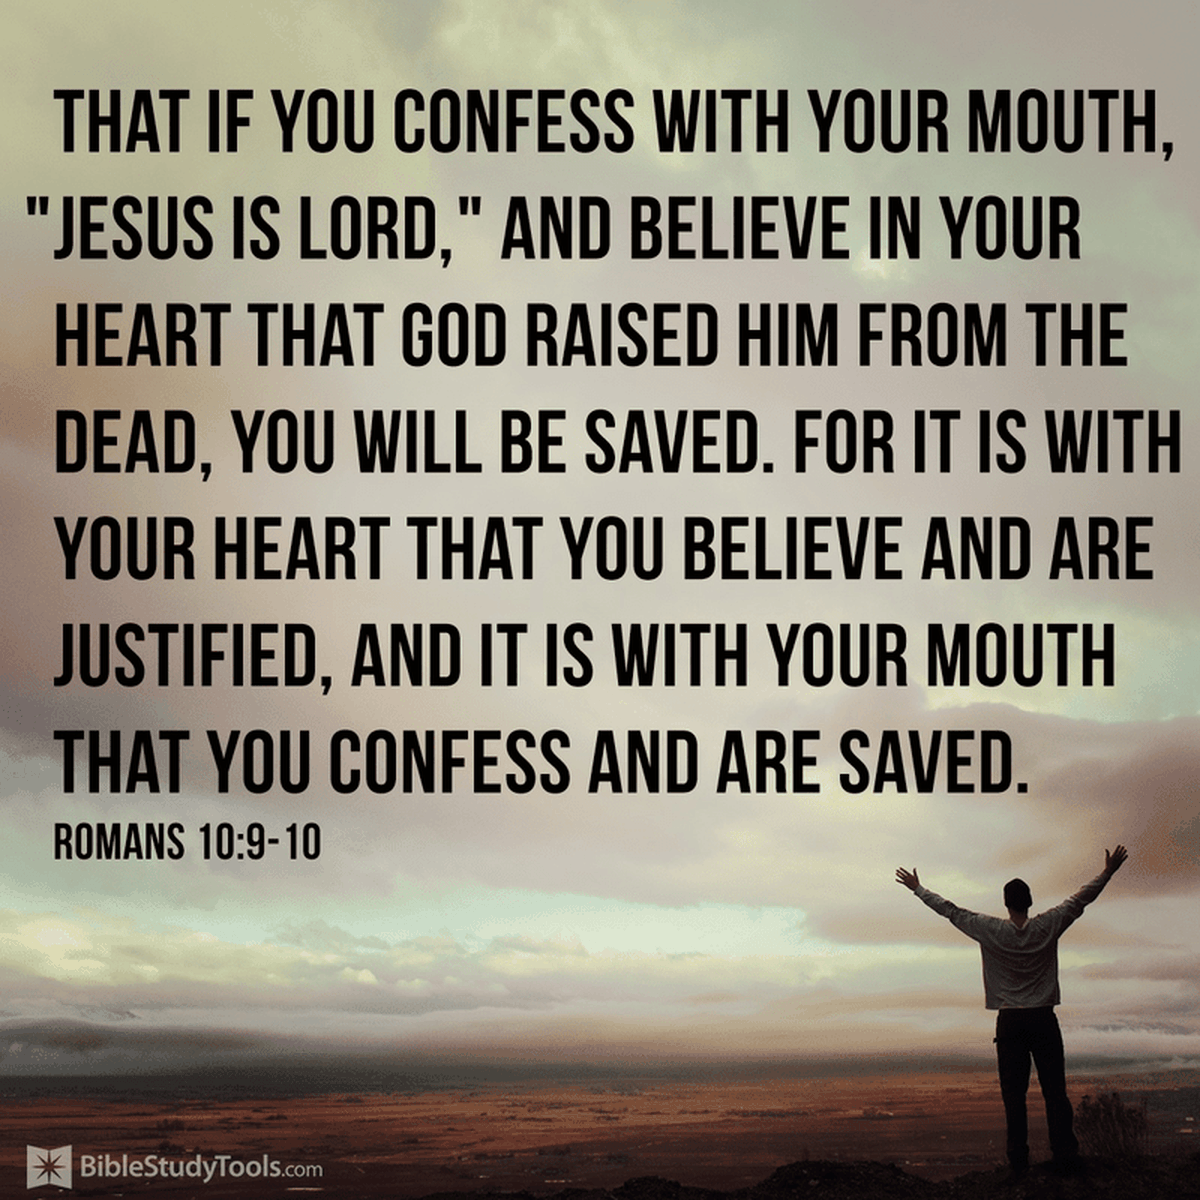 If You Confess with Your Mouth